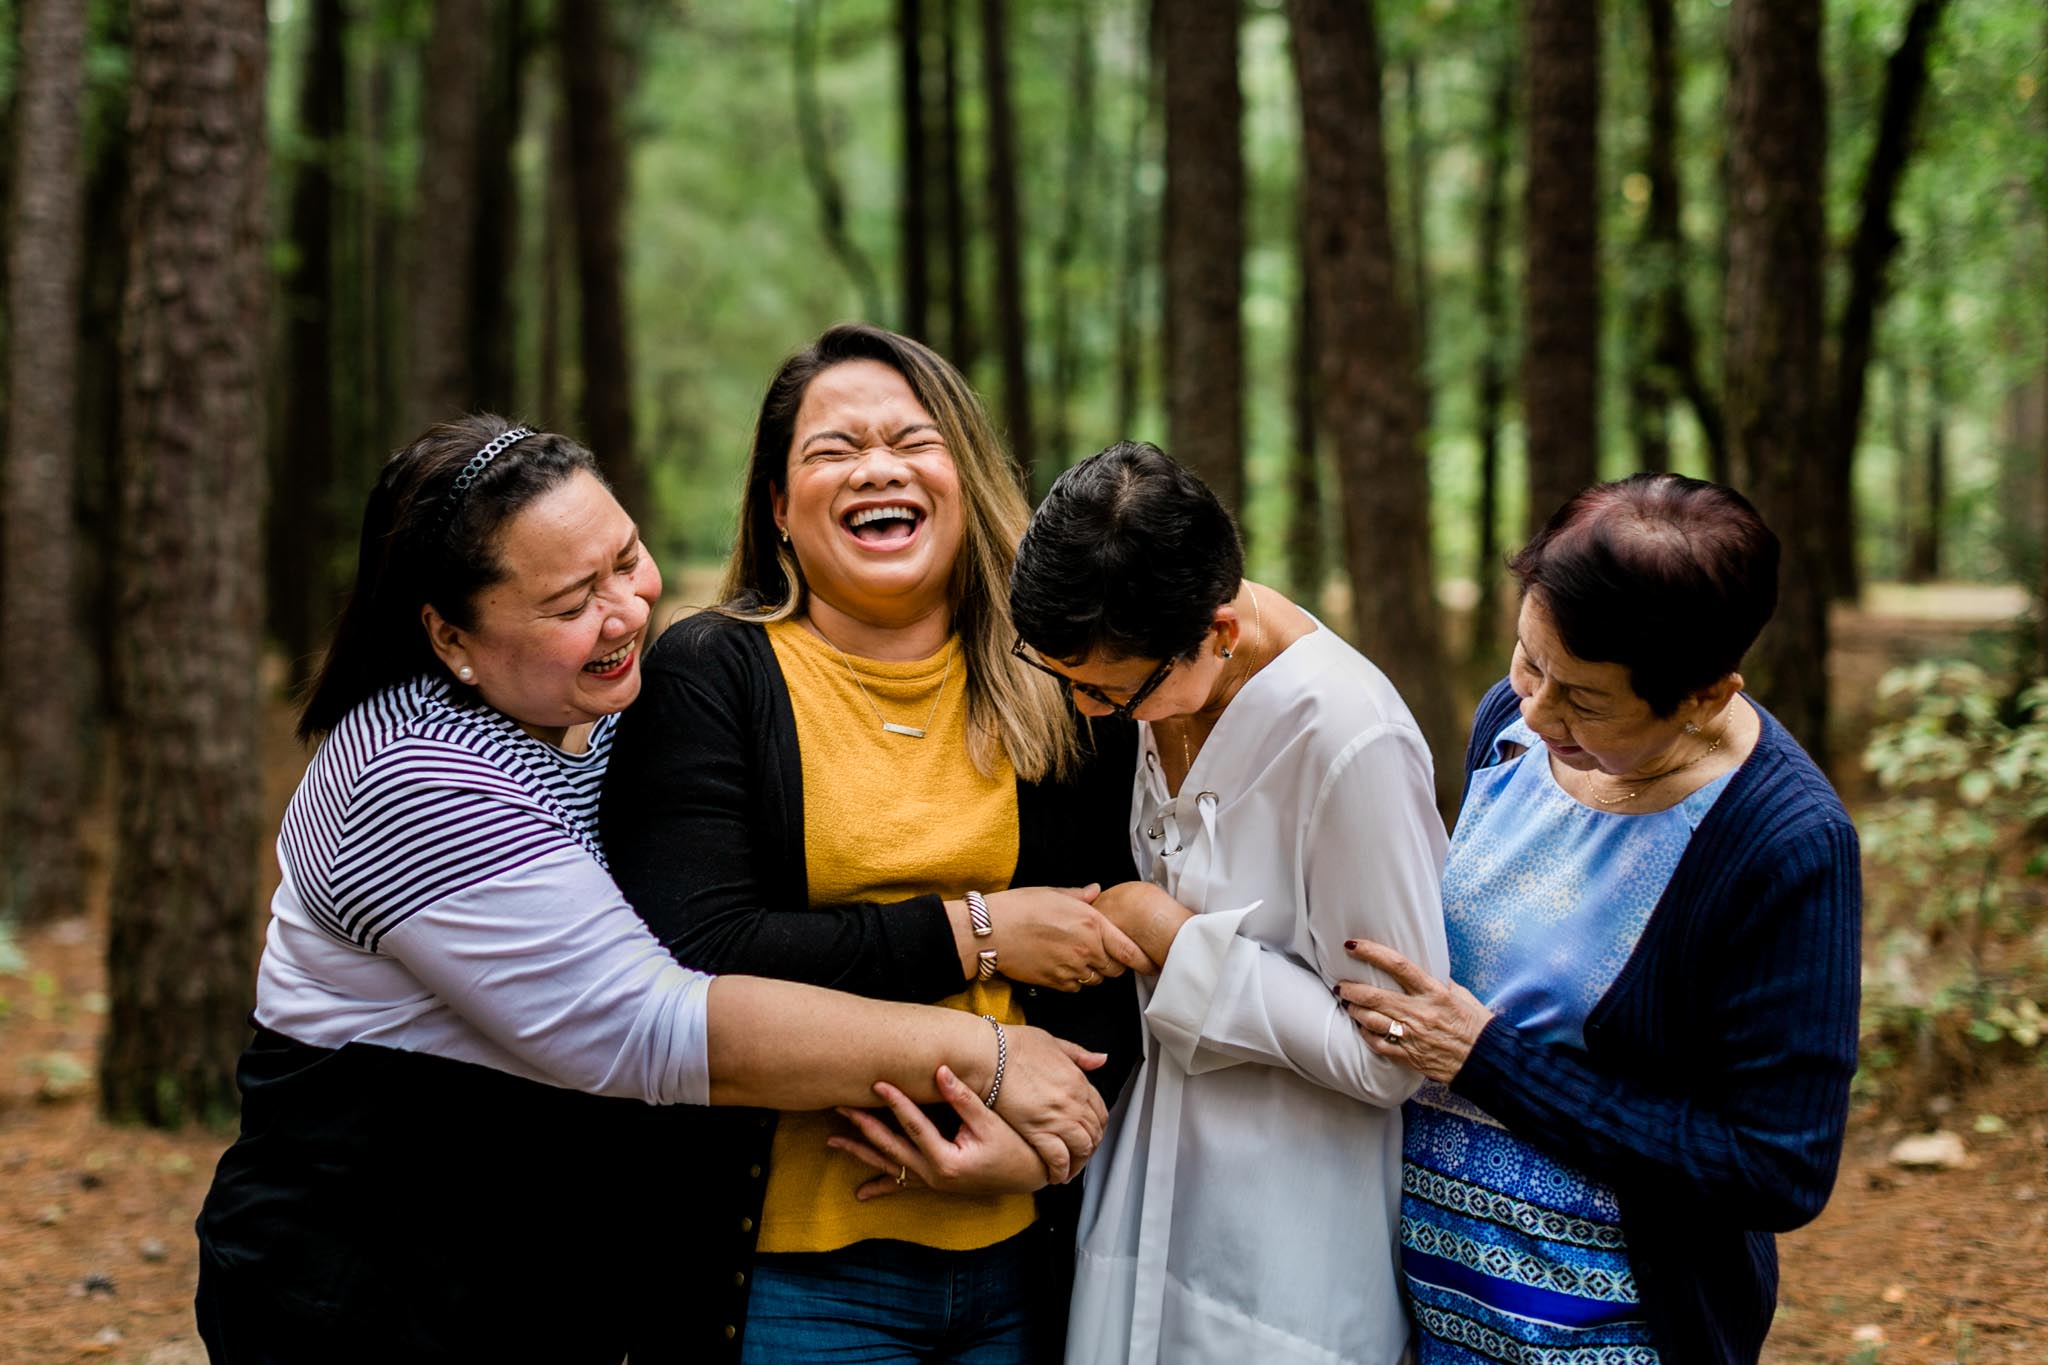 Raleigh Family Photographer | By G. Lin Photography | Umstead Park | Women smiling and laughing together